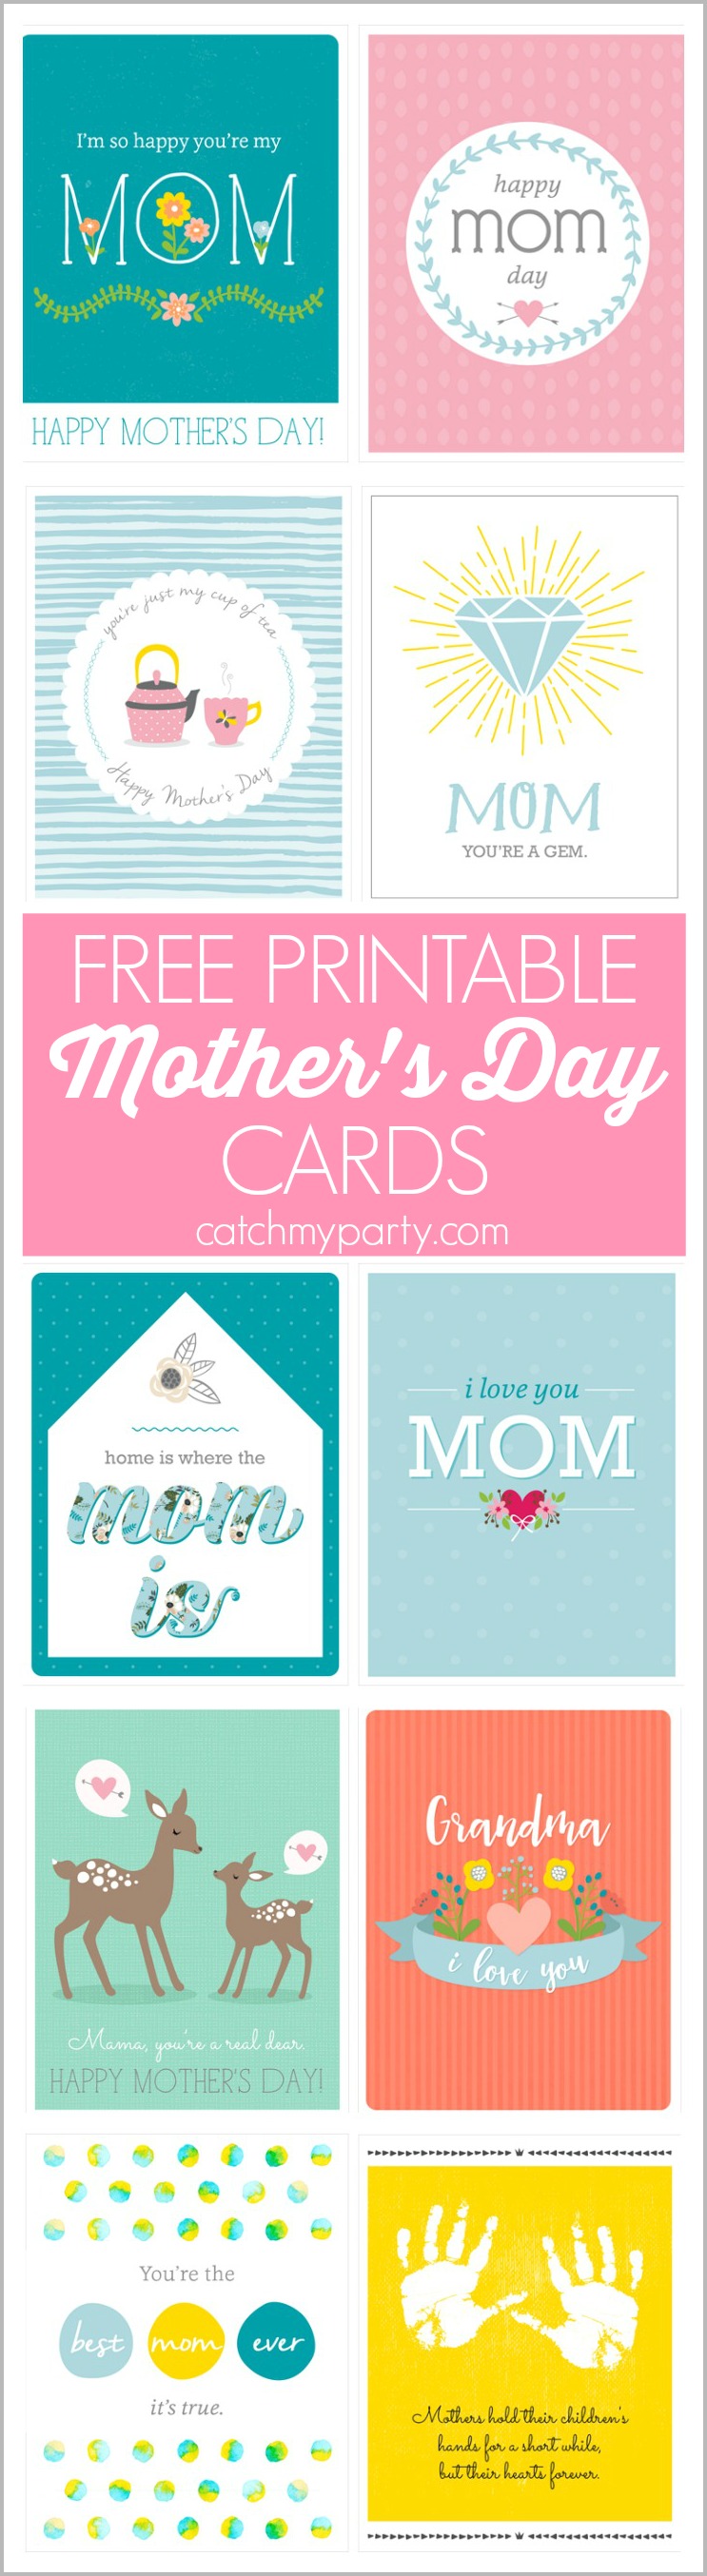 10 Free Printable Pastel Mother s Day Cards Catch My Party